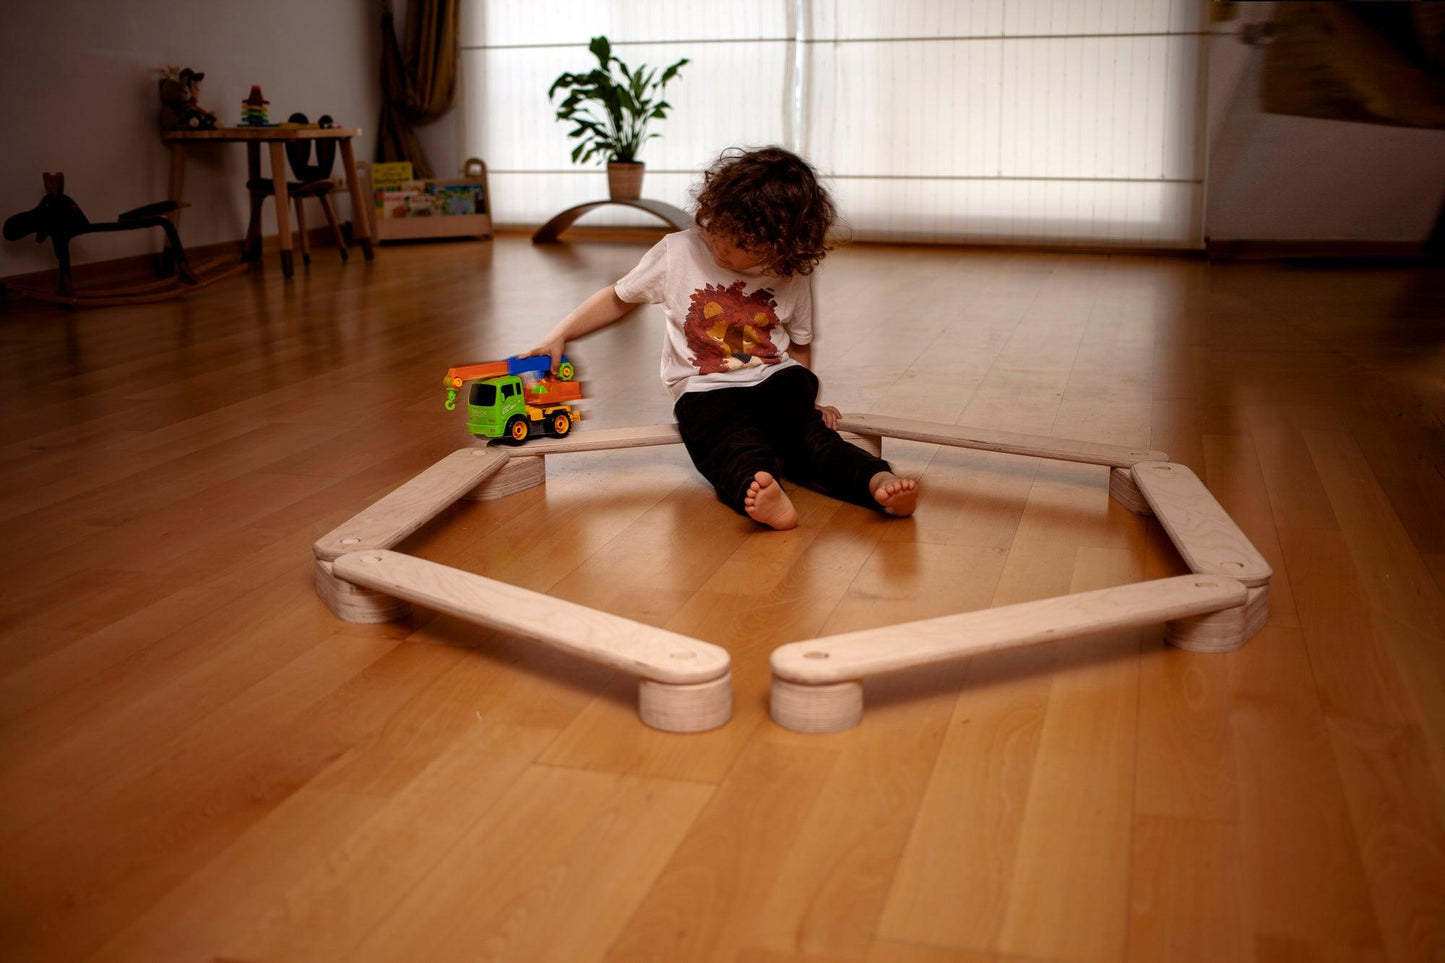 Wooden Balance Beam and Stepping Stones Set with Increased Safety and Improved Design - ToylandEU